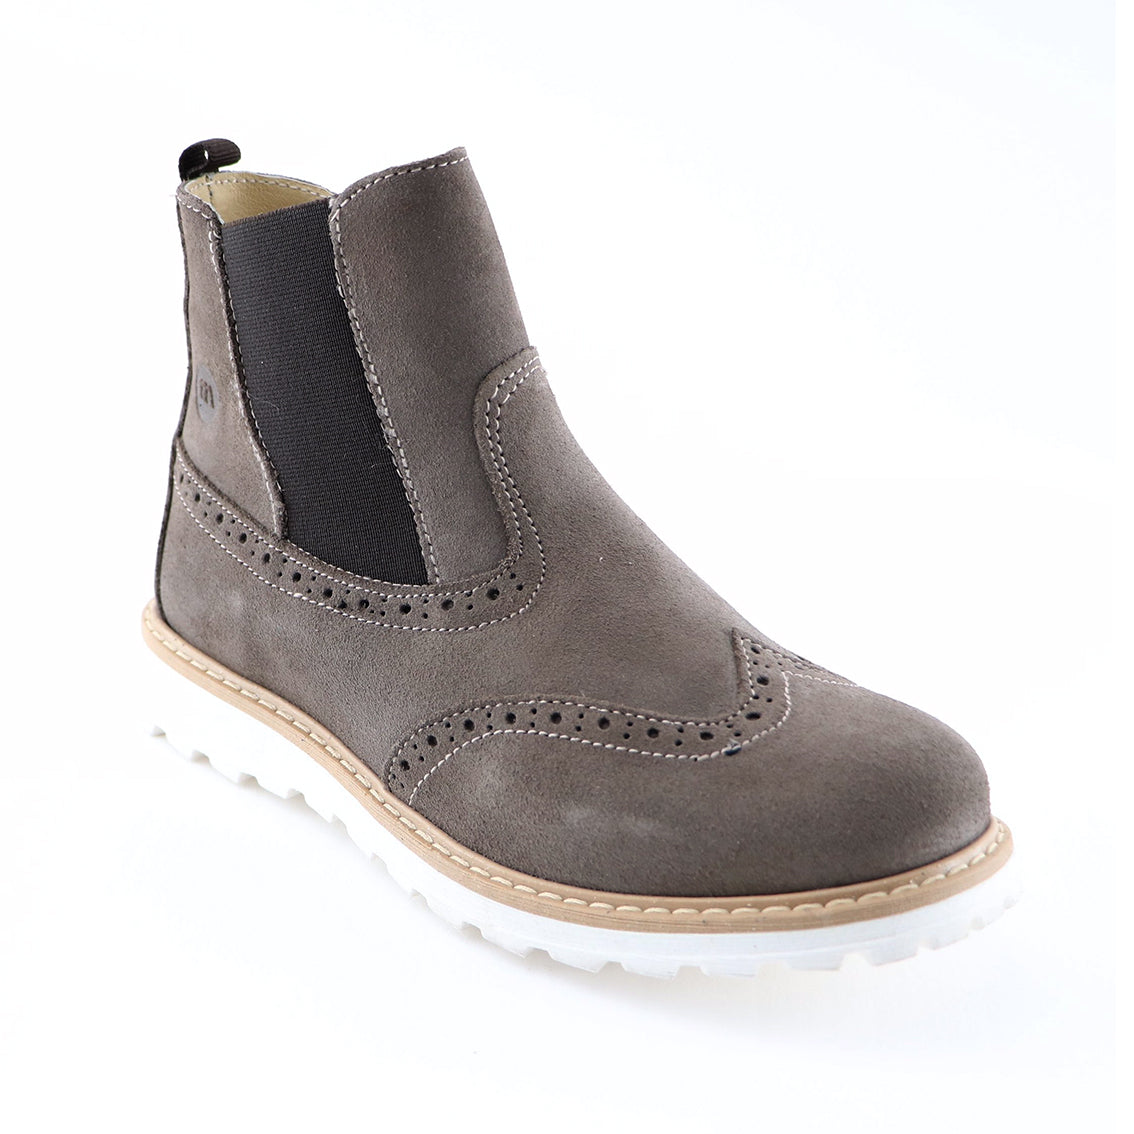 grey leather chelsea boots